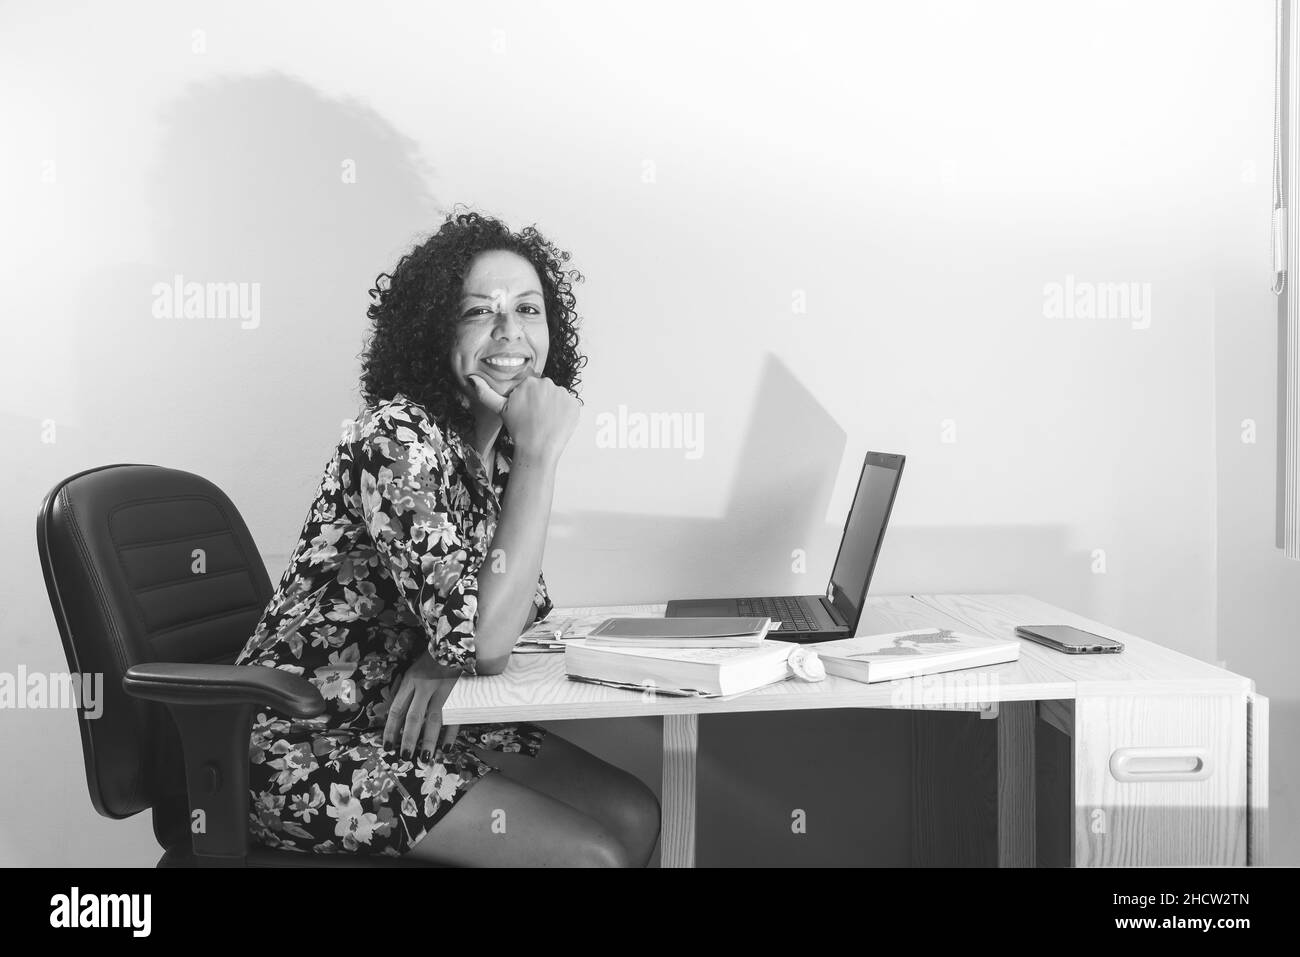 Black and white portrait of a woman sitting working remotely from her home. Salvador, Bahia, Brazil. Stock Photo